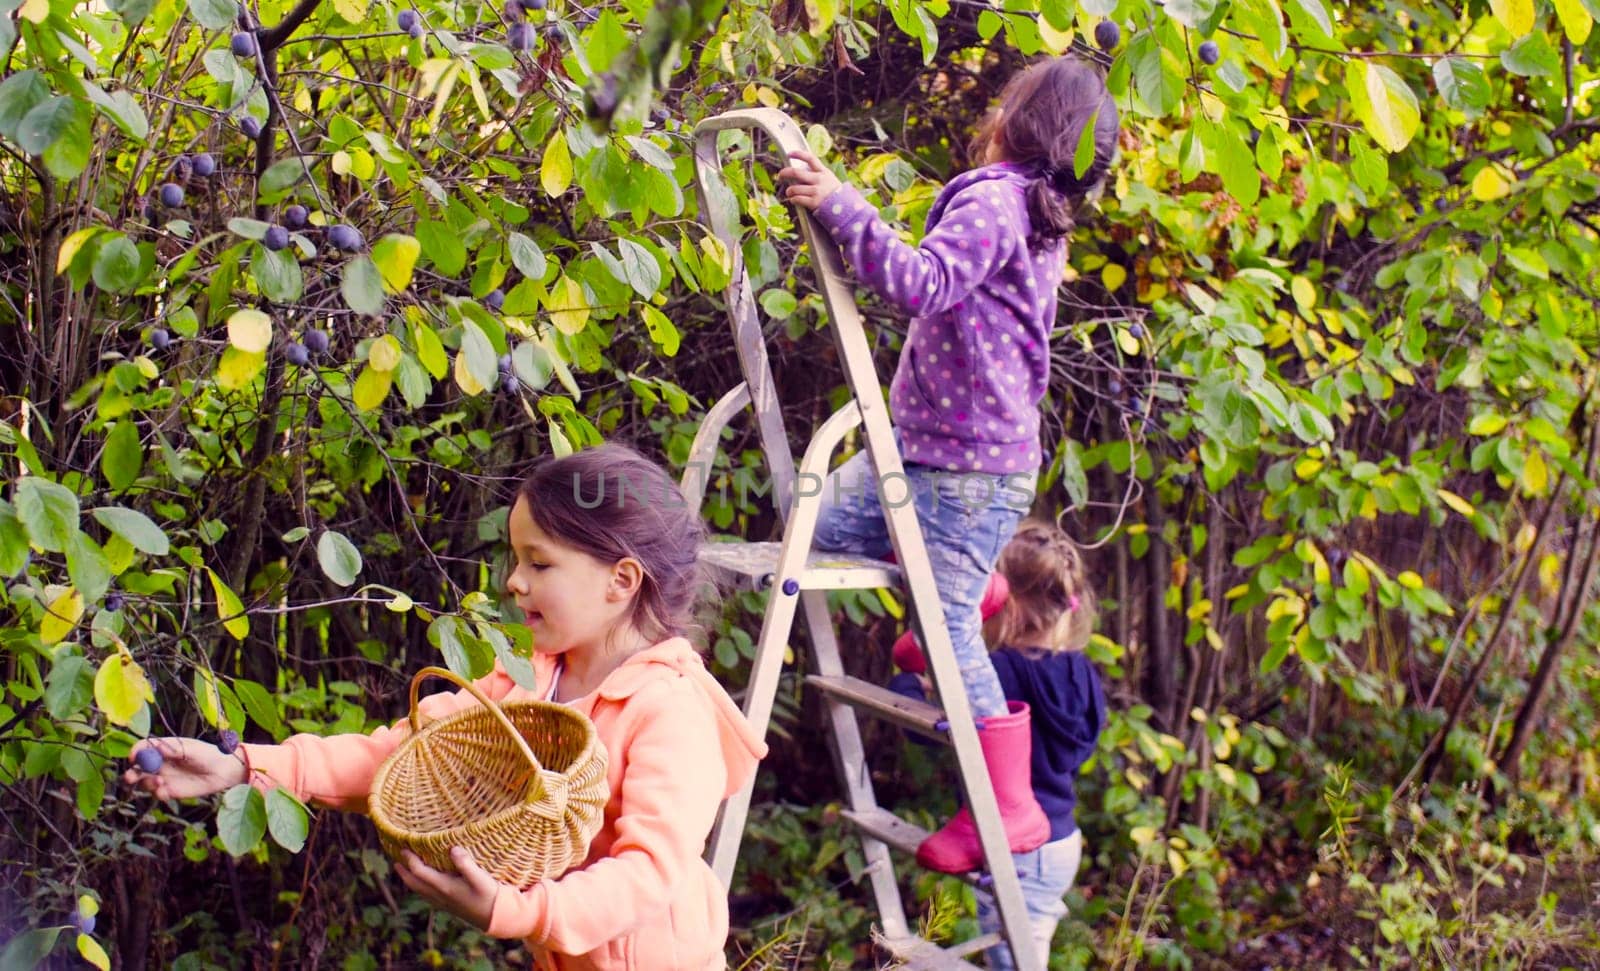 Two girls collecting plums. One standing on the ground, another standing on a ladder.